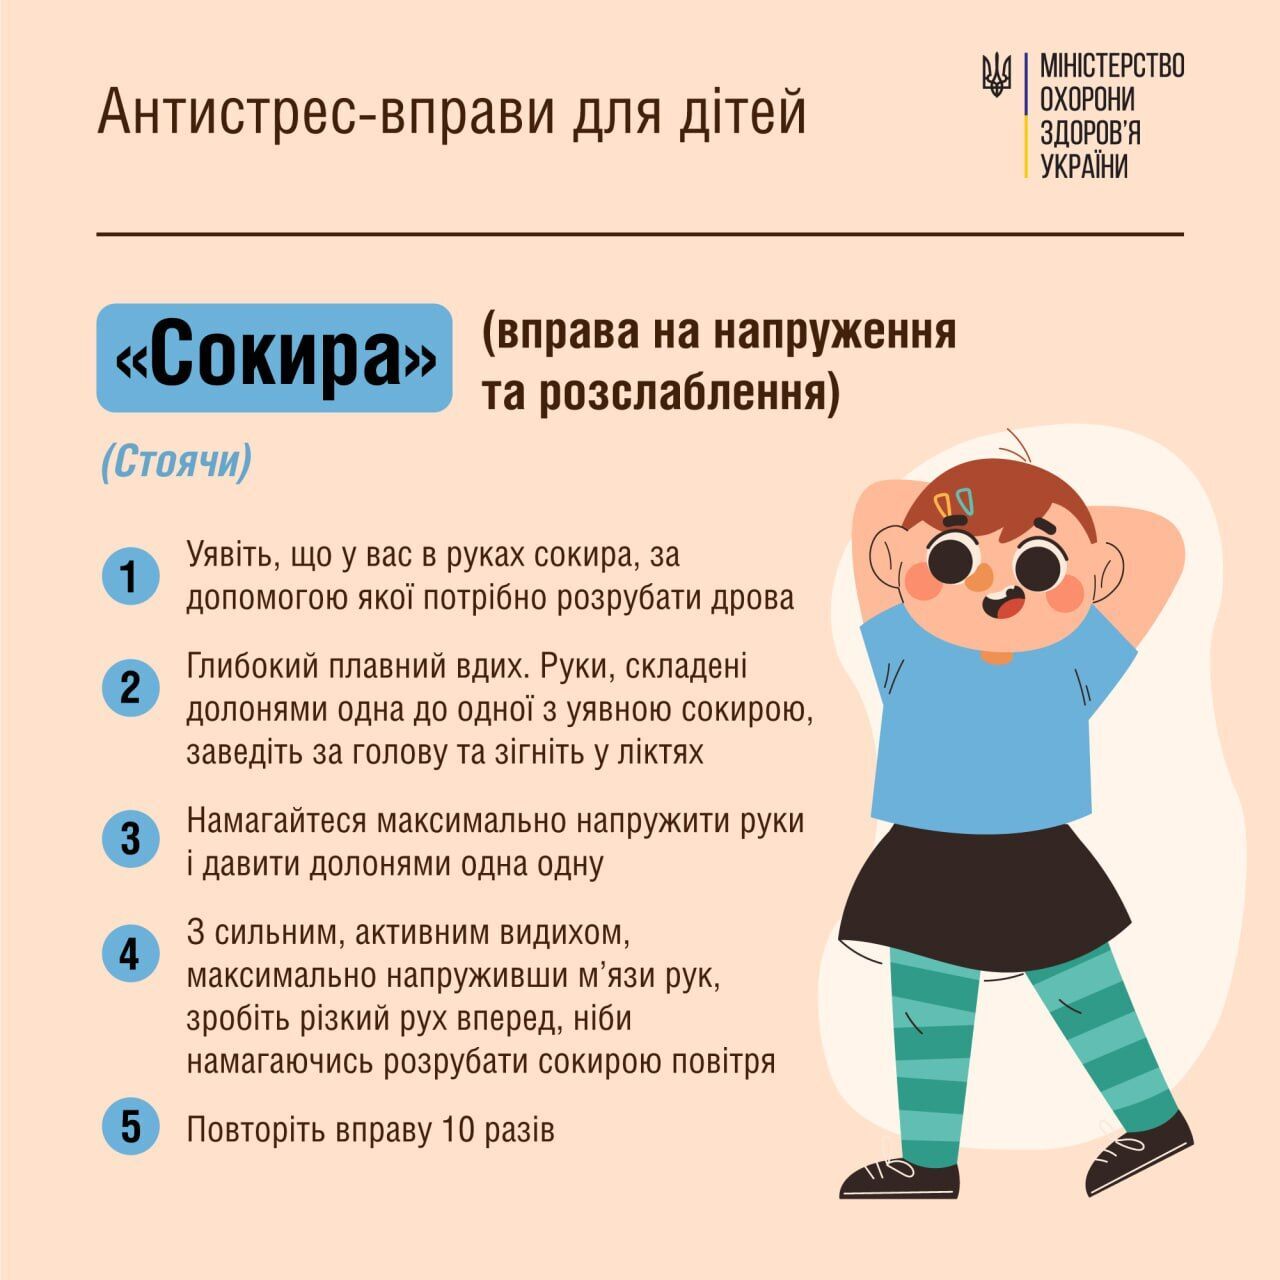 How to cope with stress of a child: simple exercises from the Ministry of Health